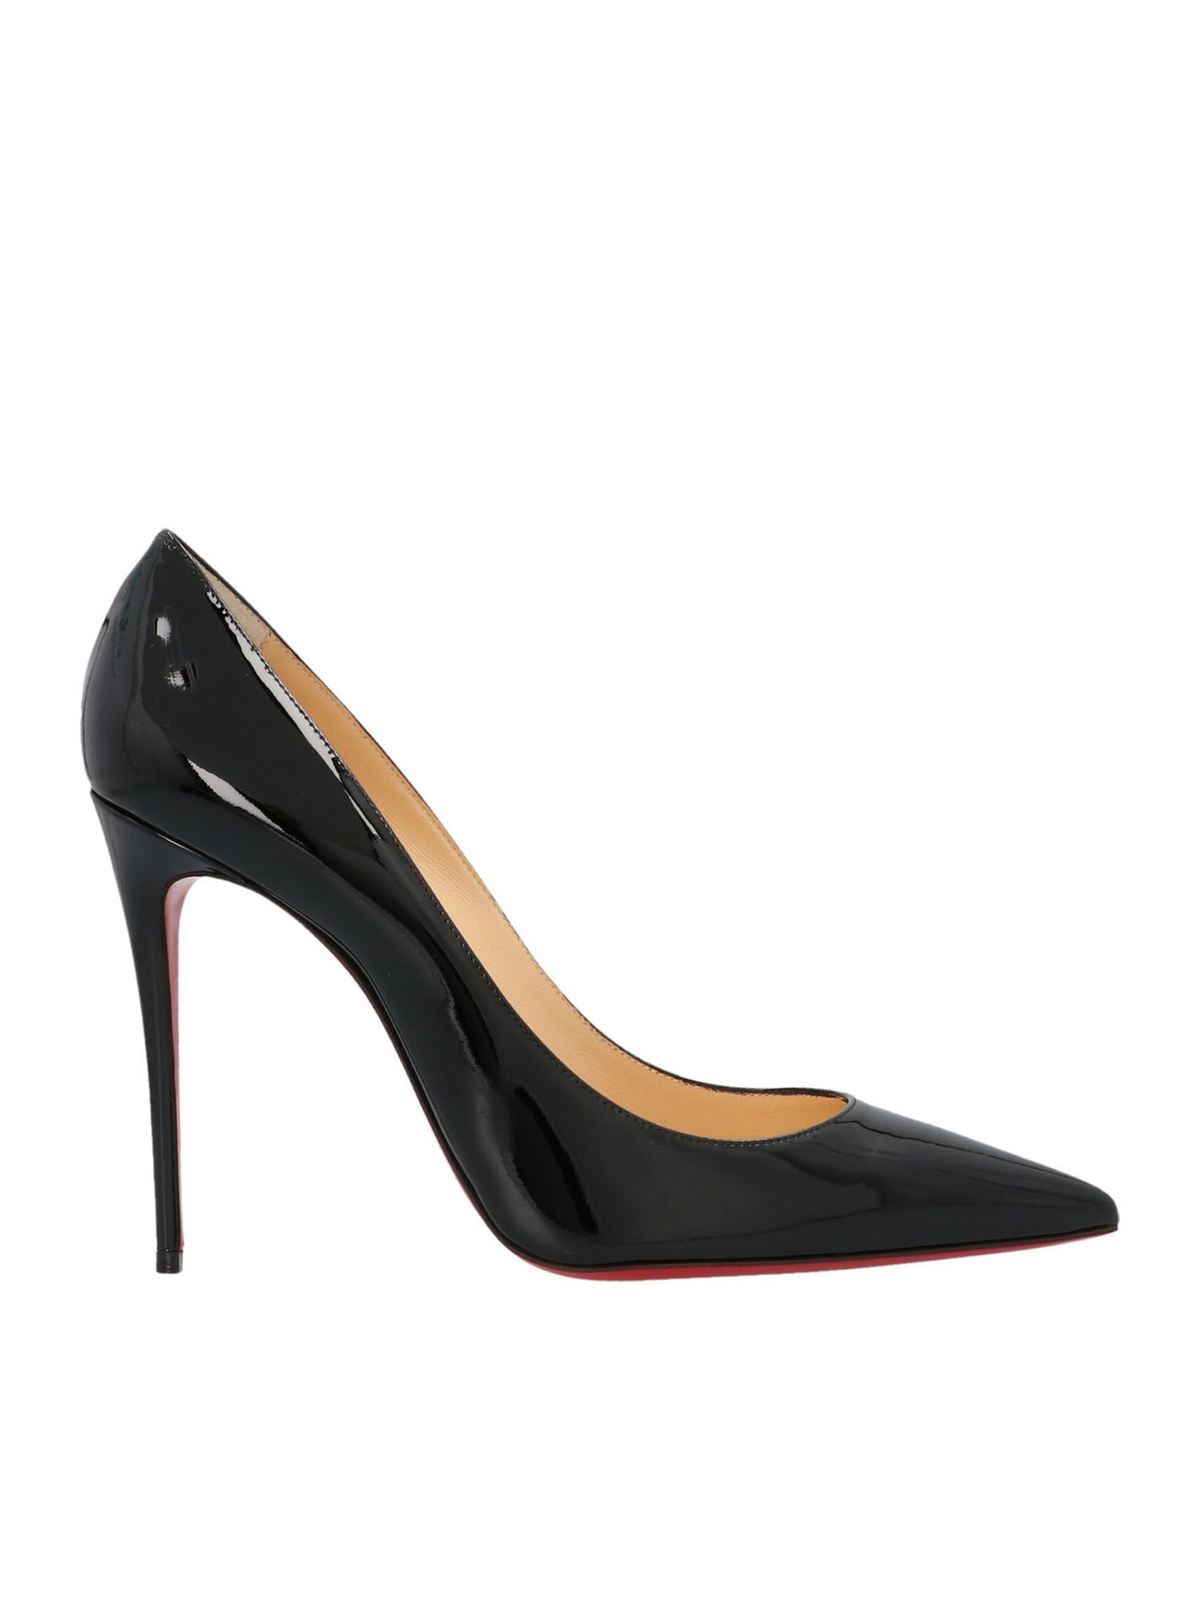 Christian Louboutin Kate 10 Pumps In Black Patent Leather